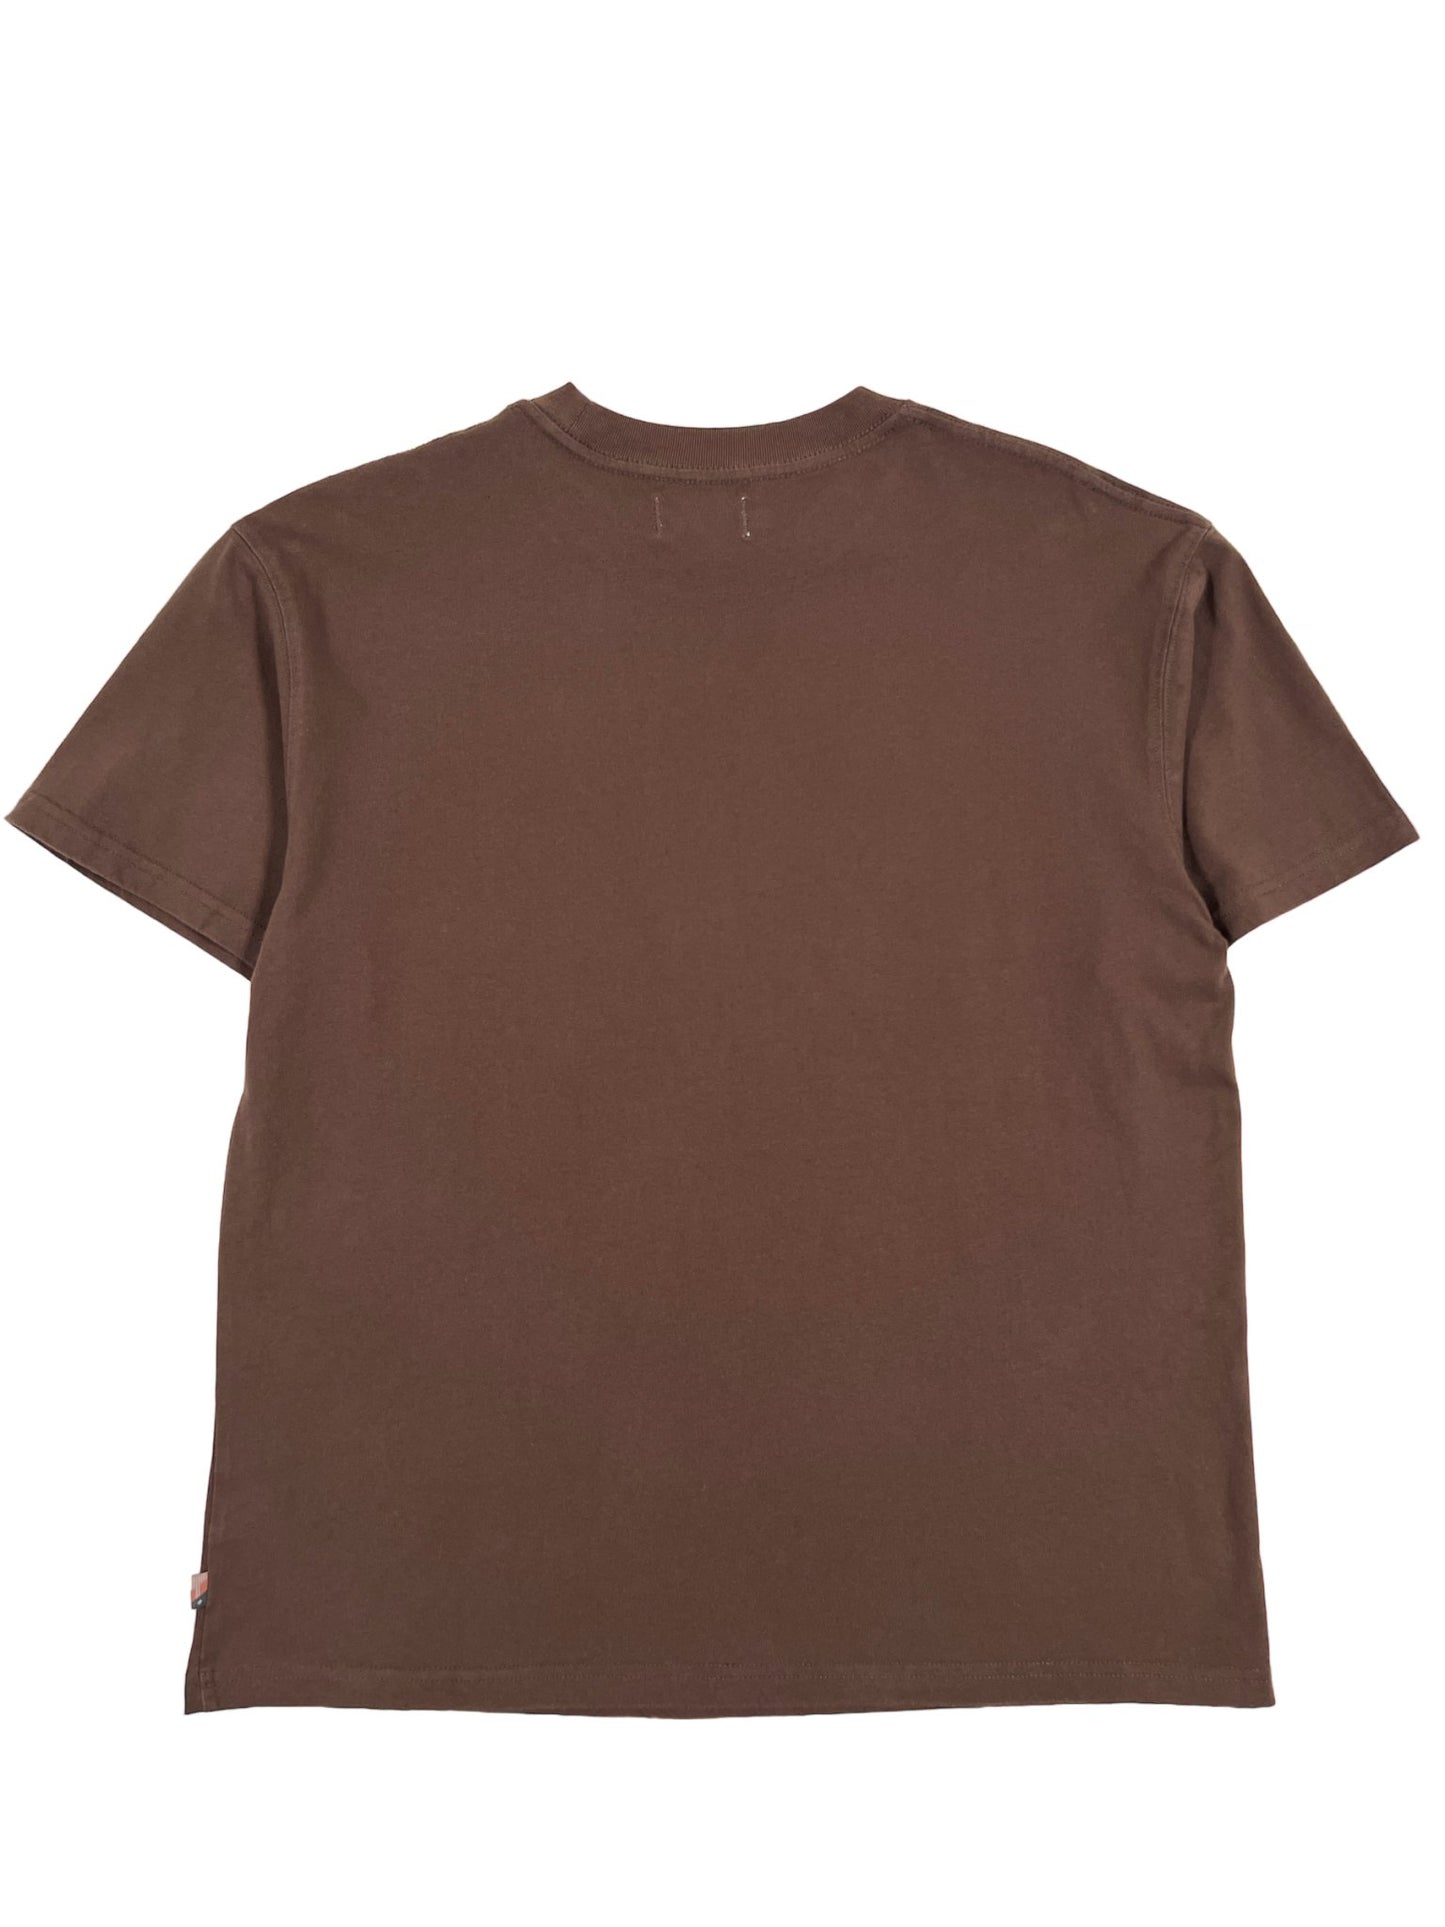 Probus HONOR THE GIFT DOMINOS TEE BROWN S